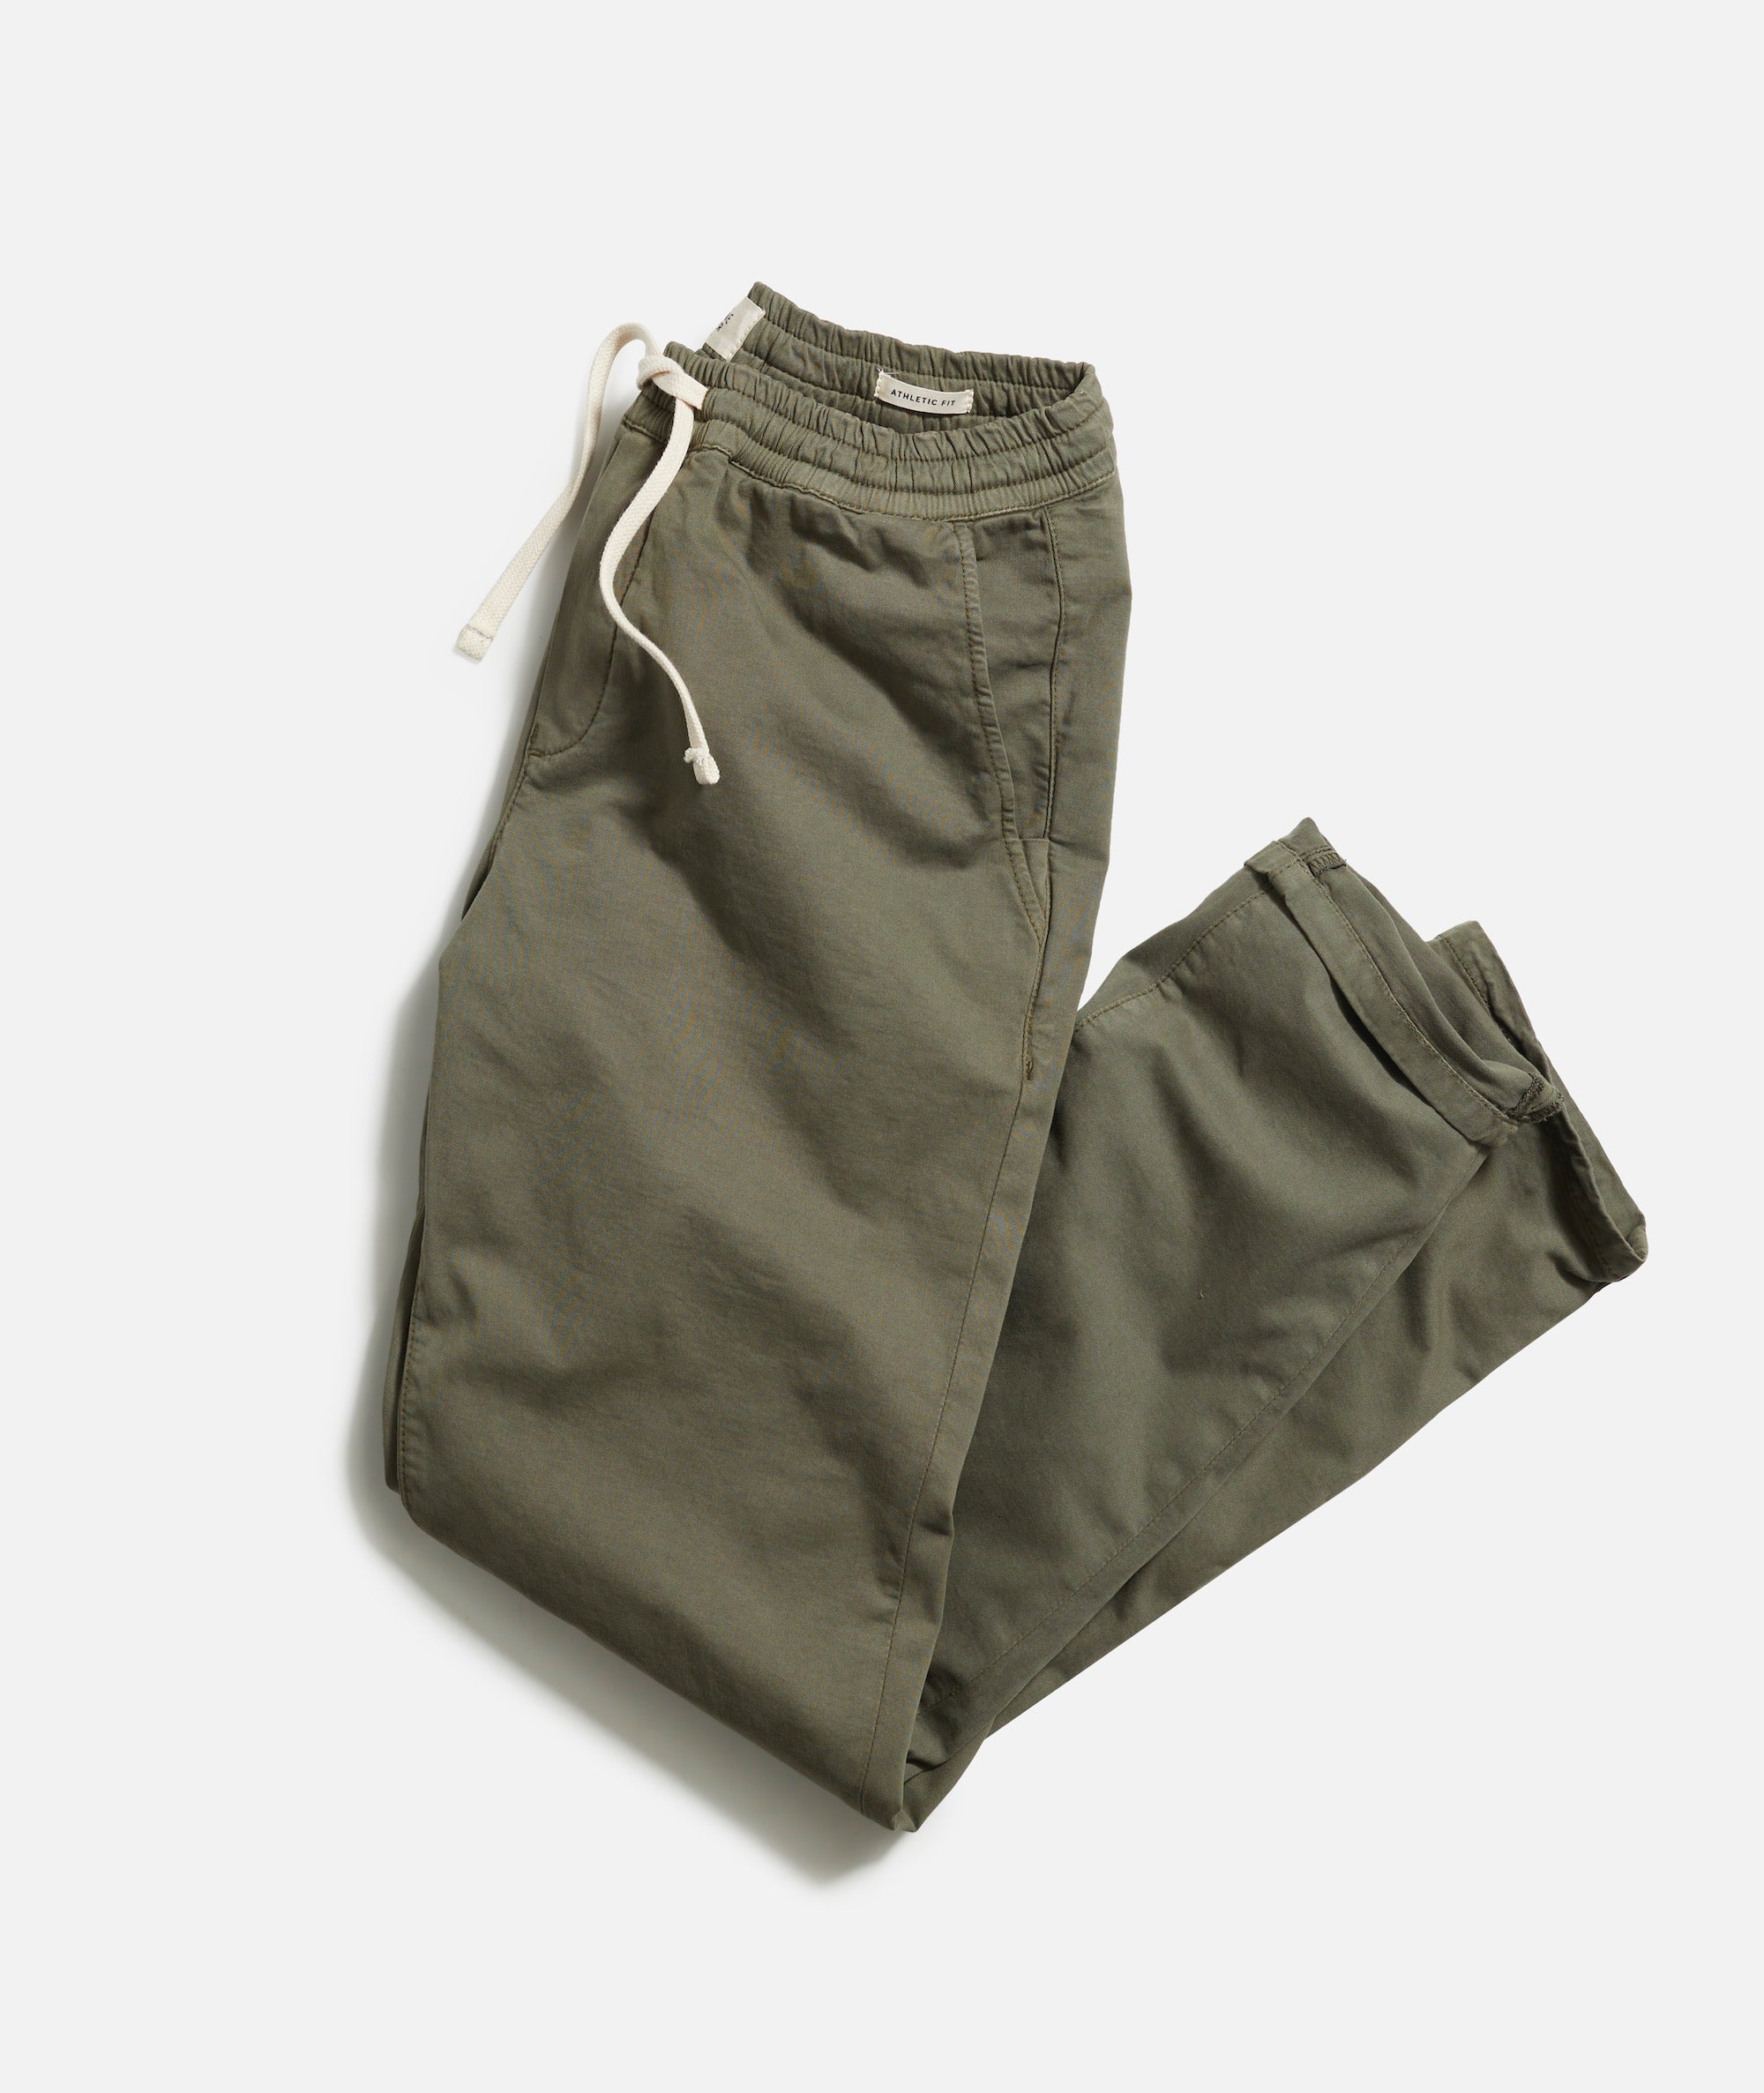 Saturday Pant Athletic Fit in Olive  Marine Layer